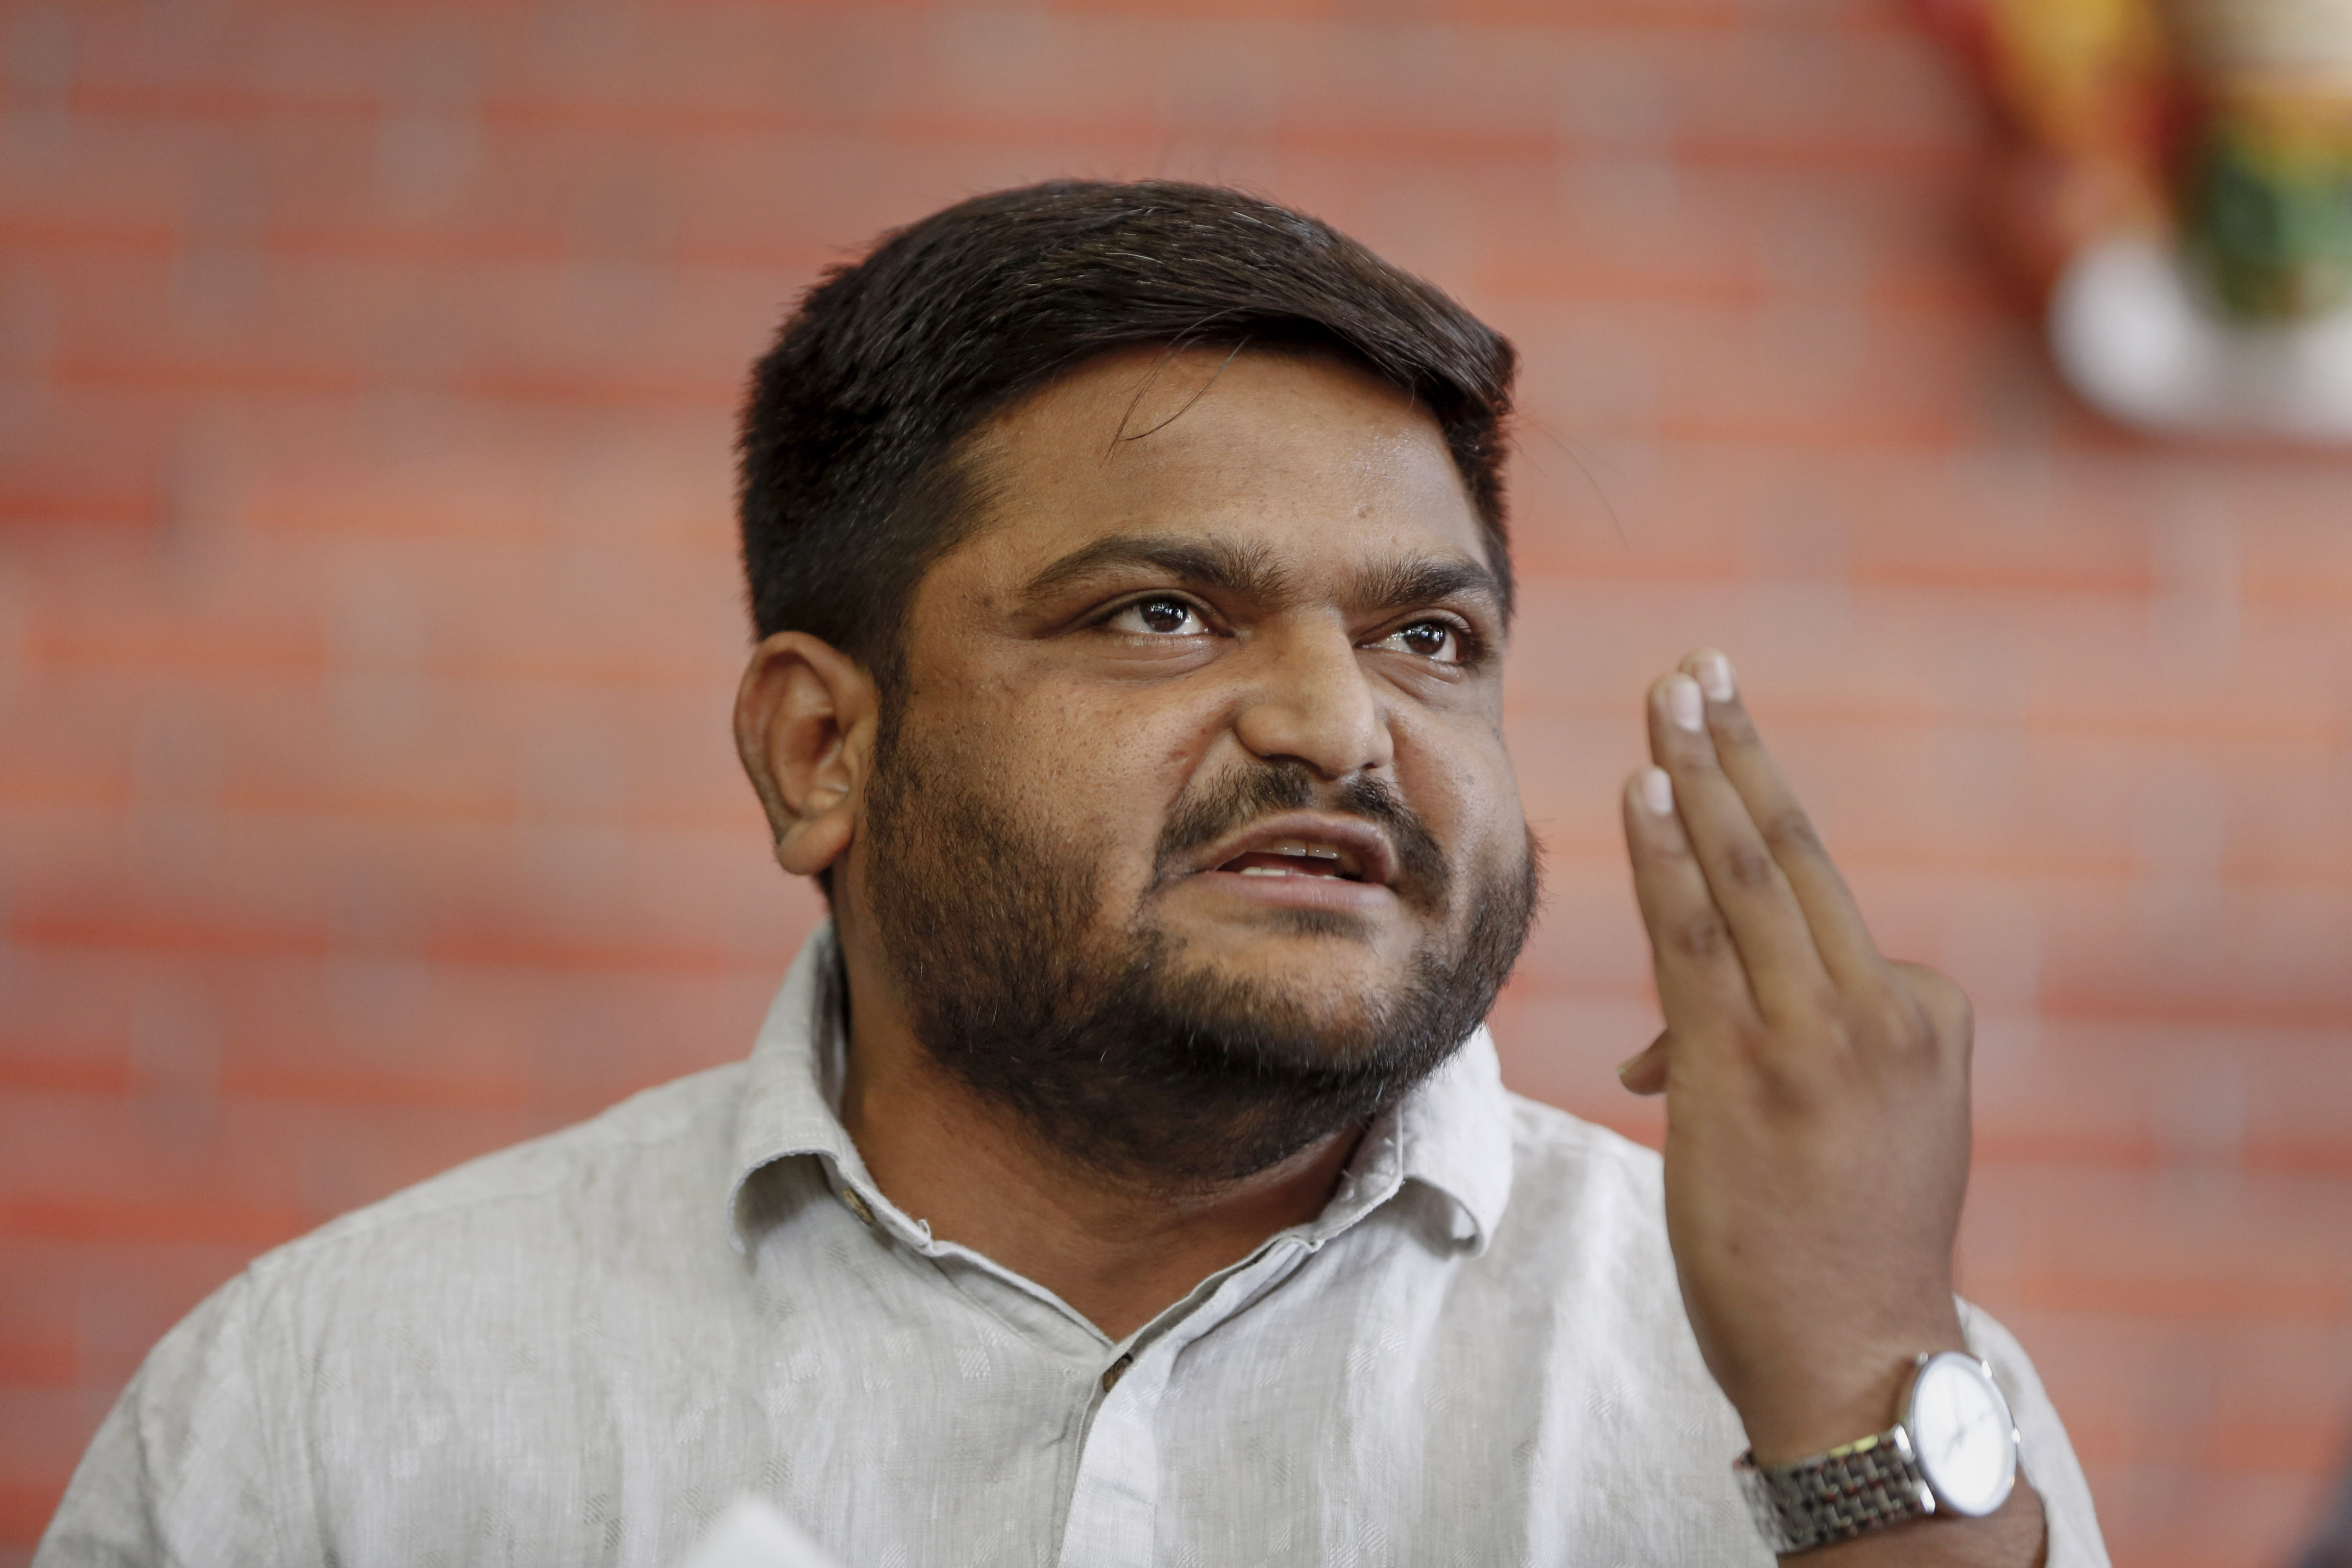 Hardik Patel quit Congress fearing jail in sedition cases, says party's Gujarat unit chief Thakor; claims his resignation scripted by BJP